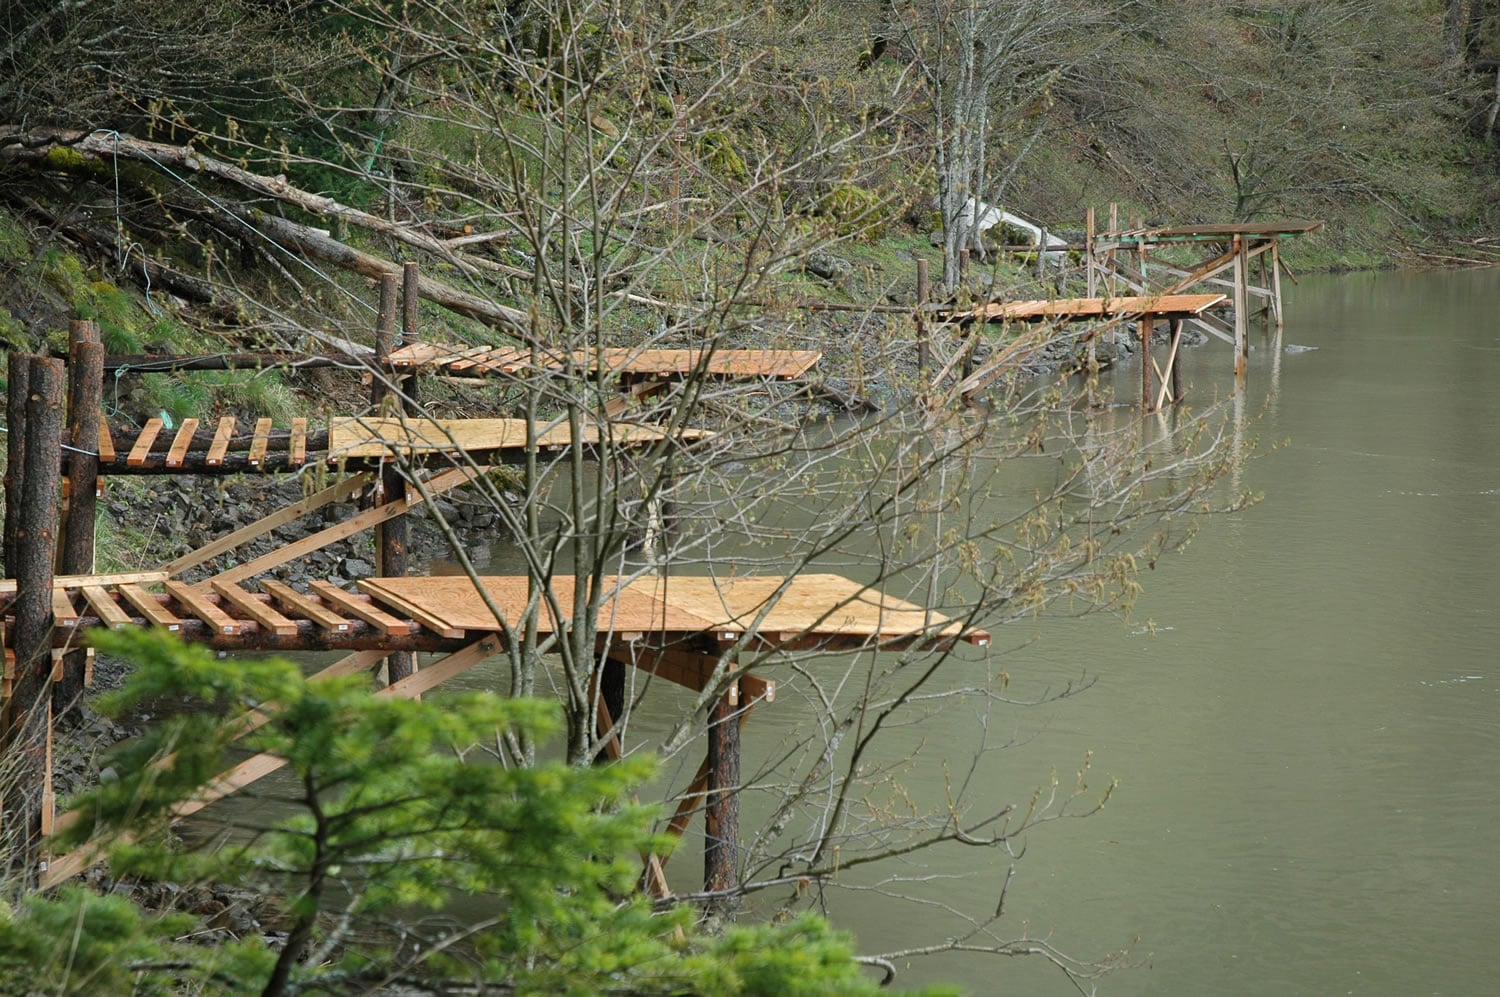 Yakama tribal fishermen have built more than a dozen scaffolds to use at Drano Lake in the Columbia River Gorge. These are on the west side of the lake.